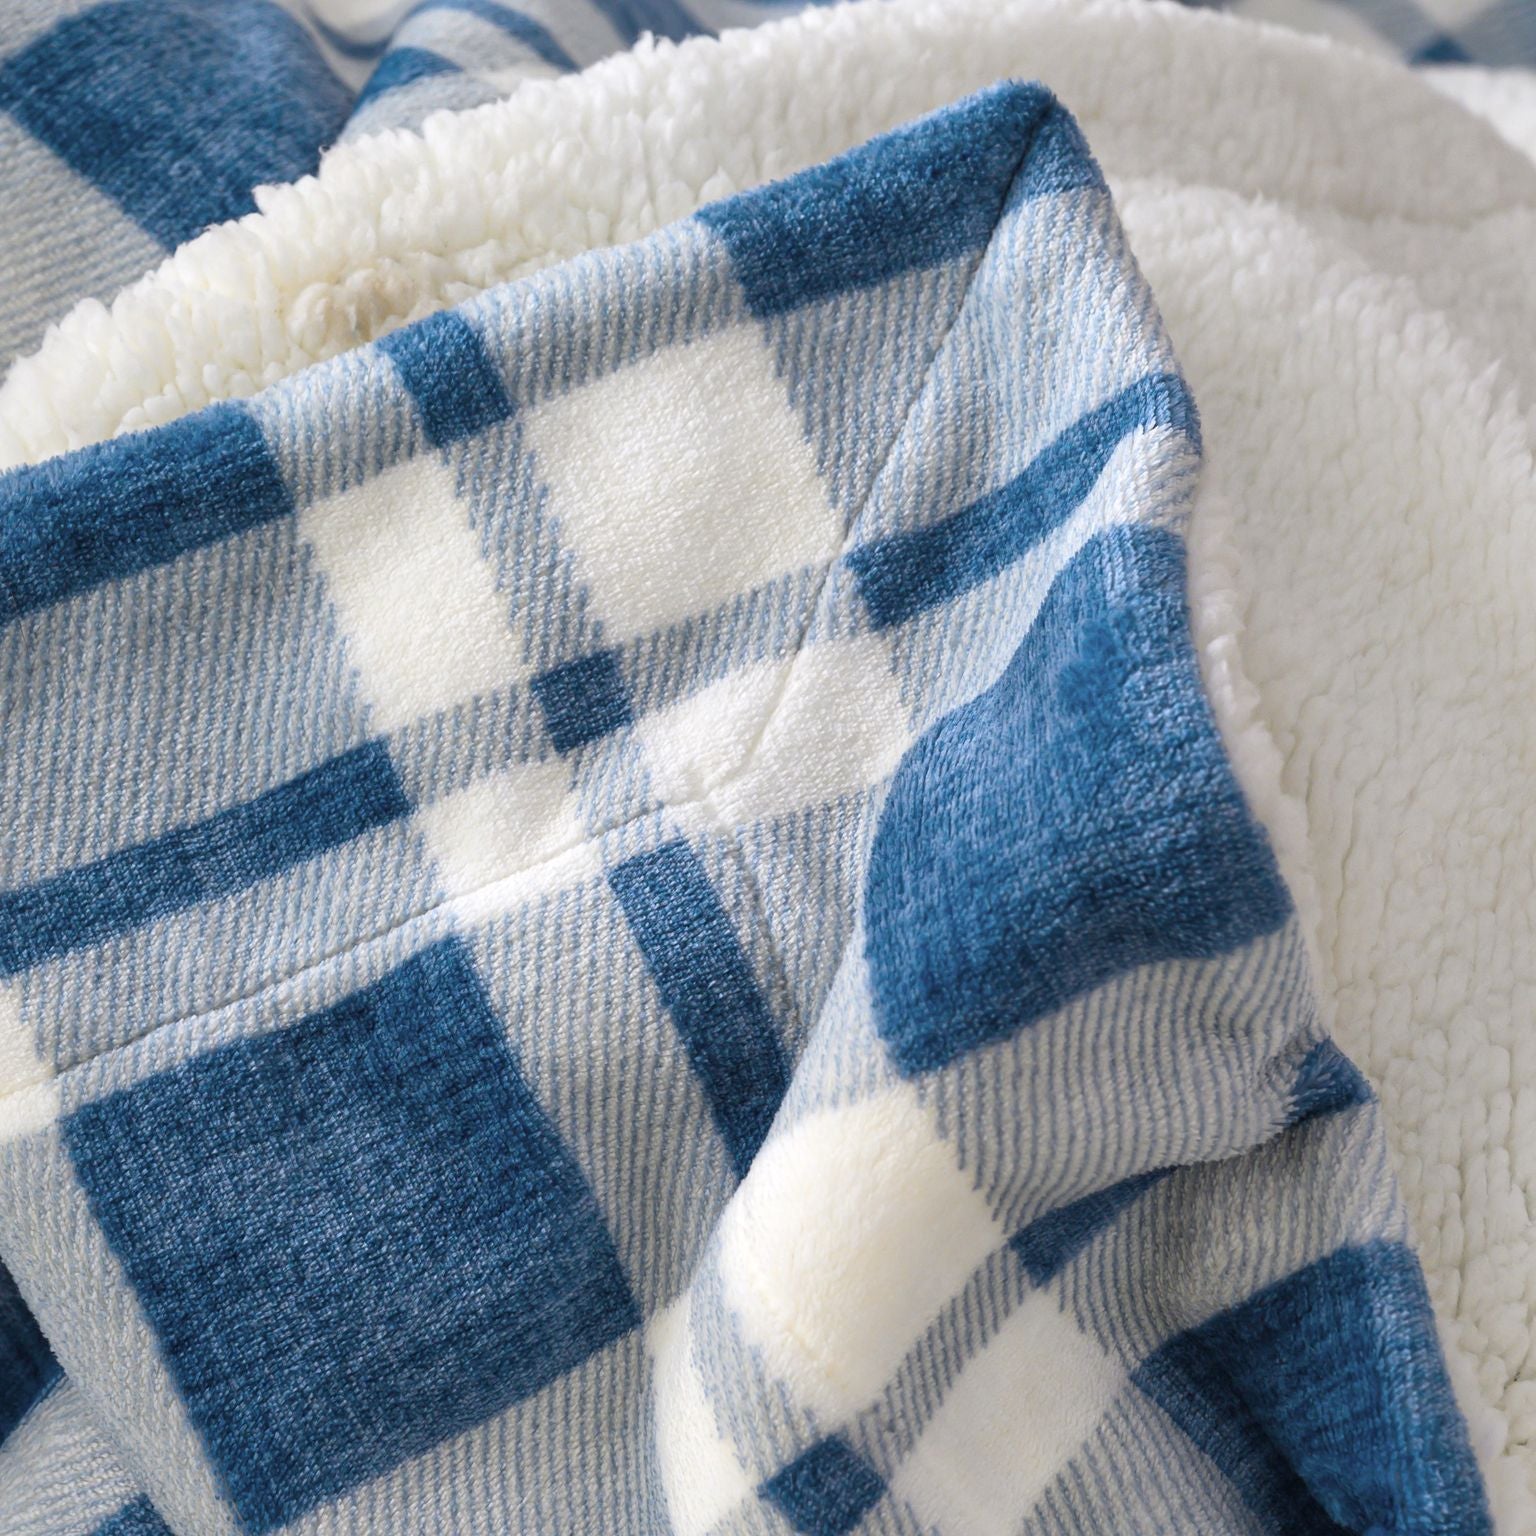 Printed Velvet to Solid Sherpa Throw Blanket 50 x 60 inches Classic Blue Plaid